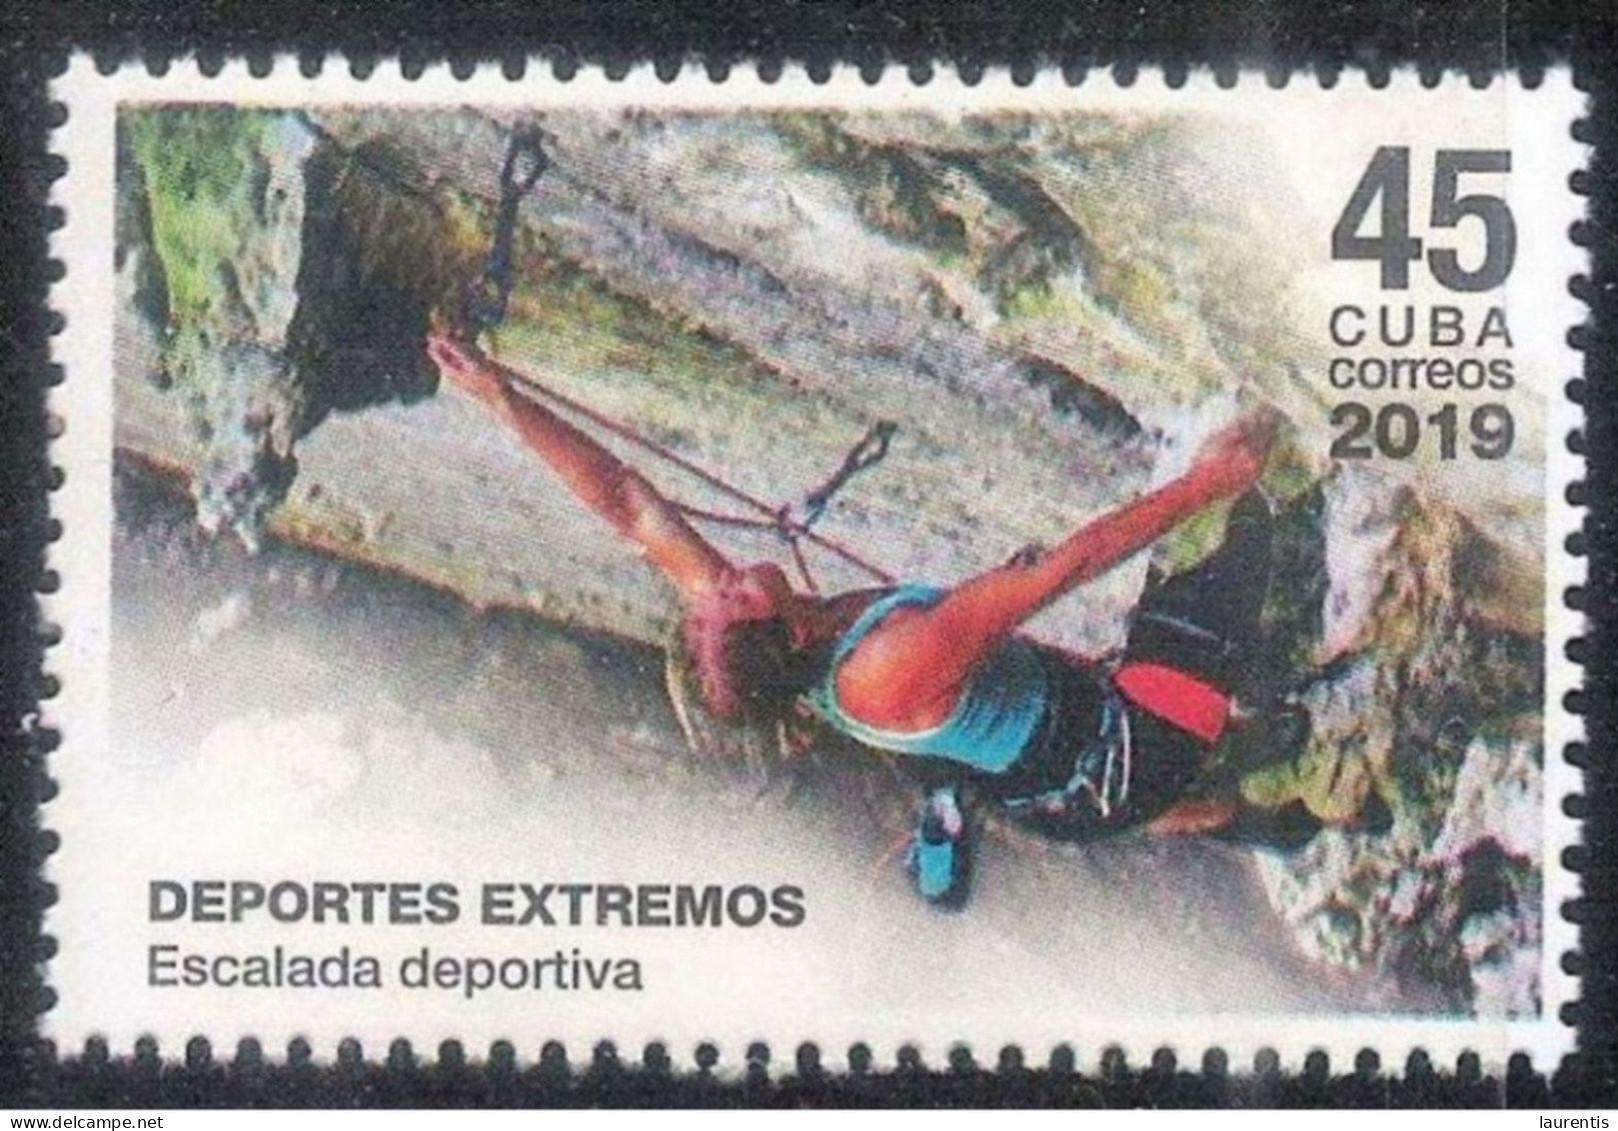 1253  Climbing - Only This One In The Stamp Set - MNH - Cb - 1,25 - Escalada